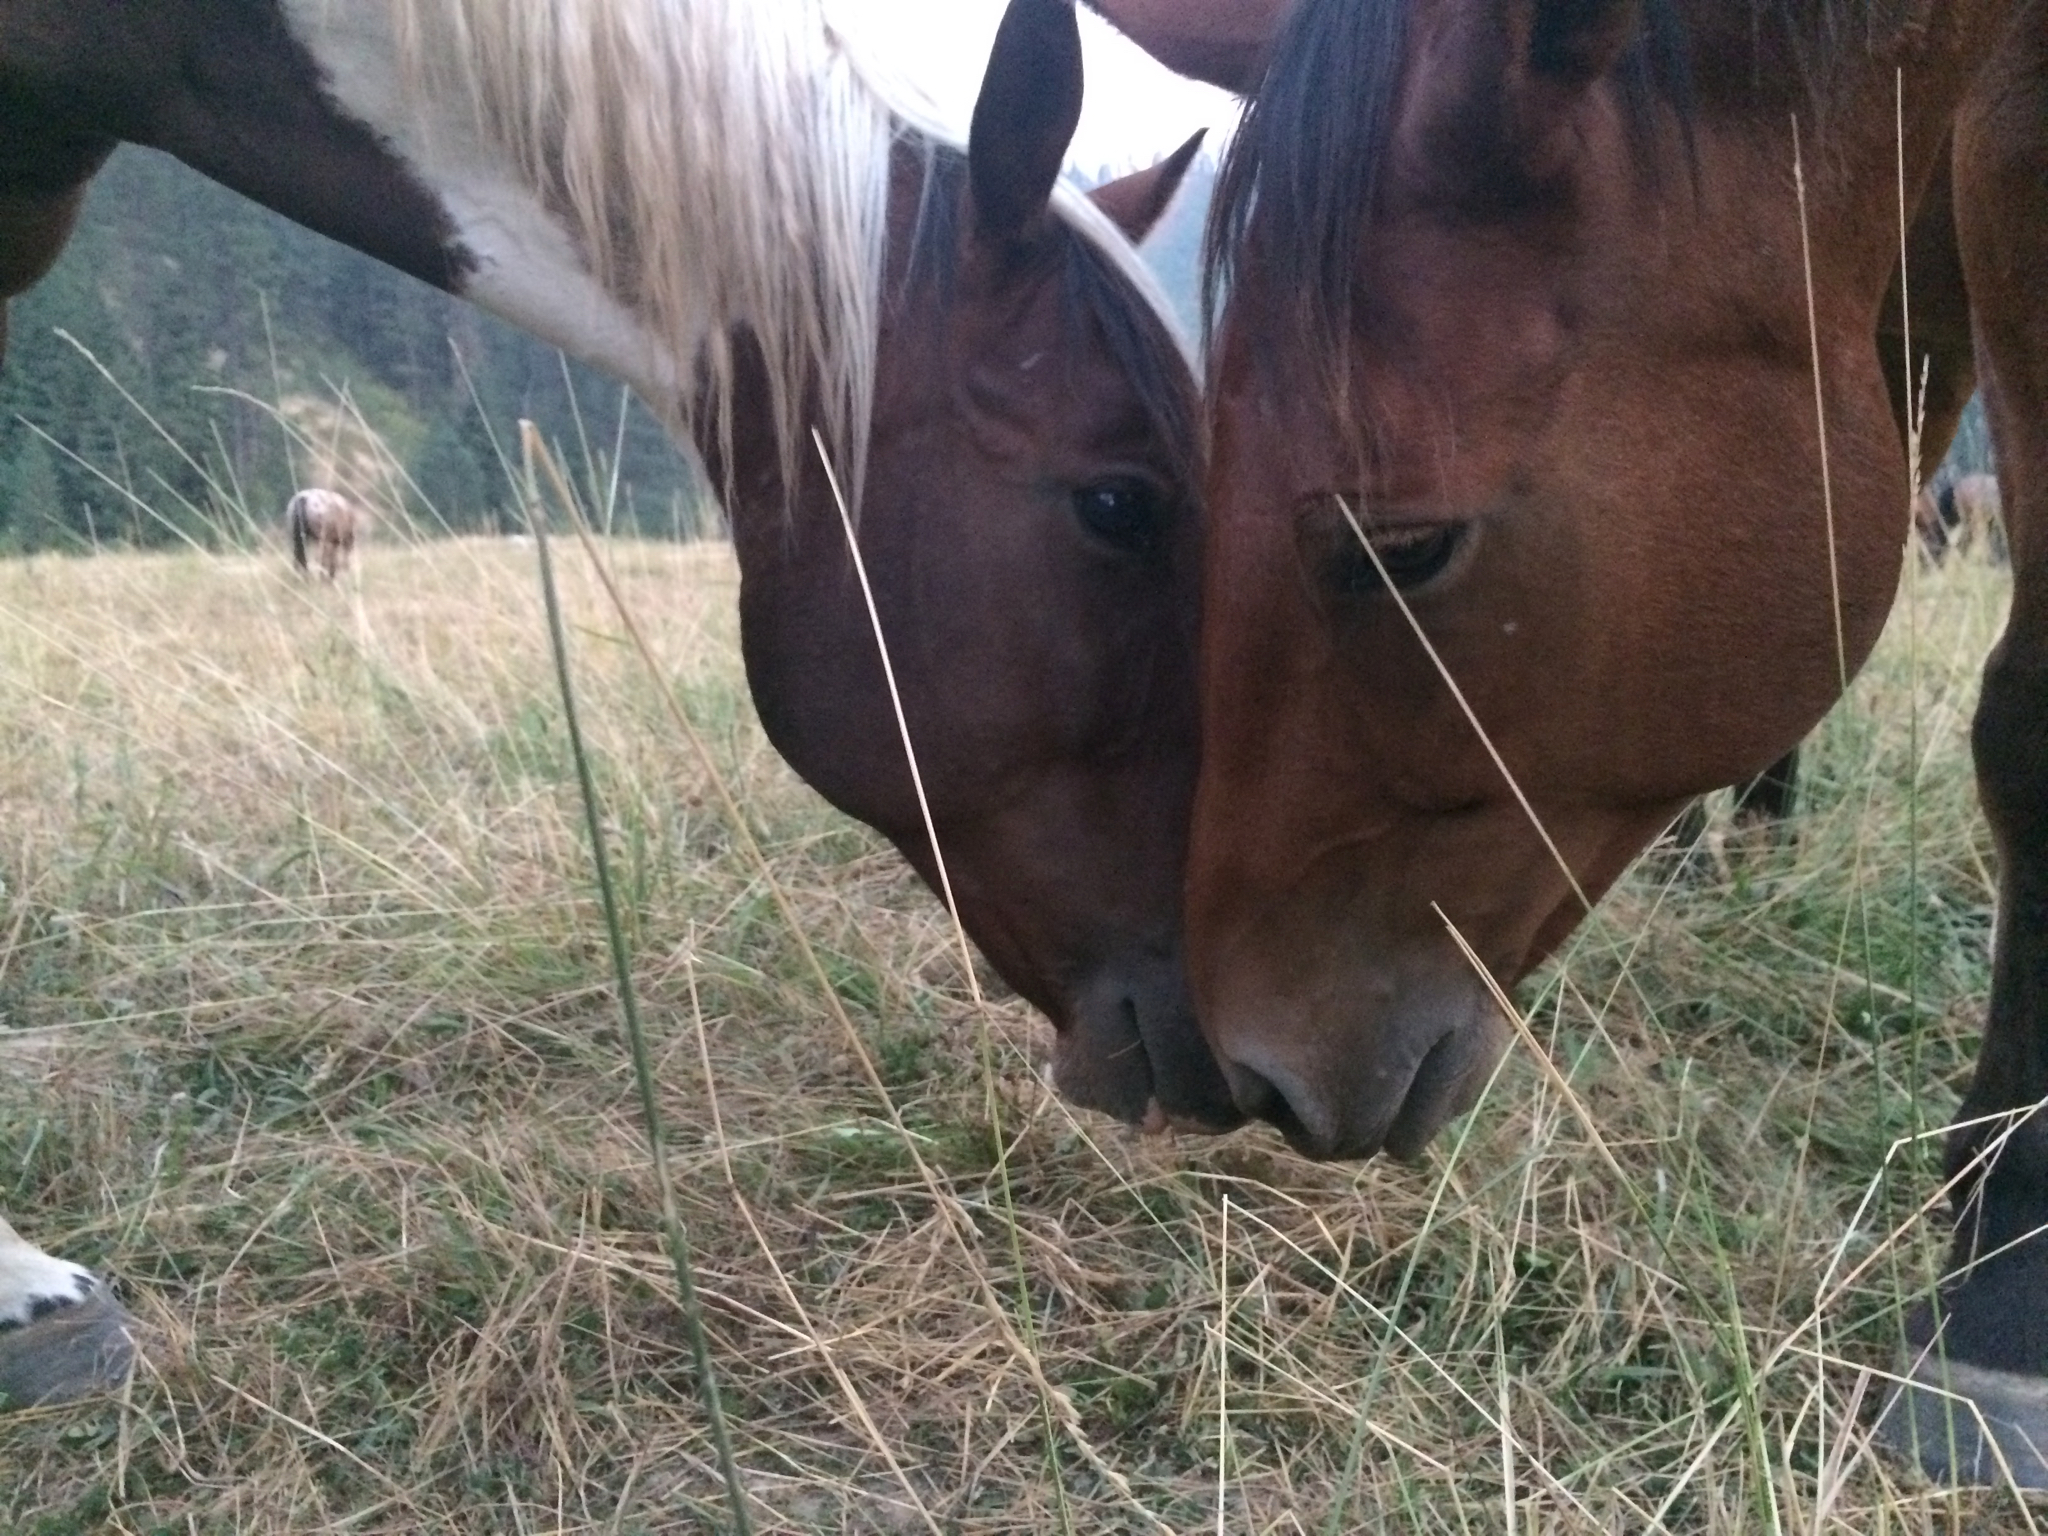 Two horses touching faces.